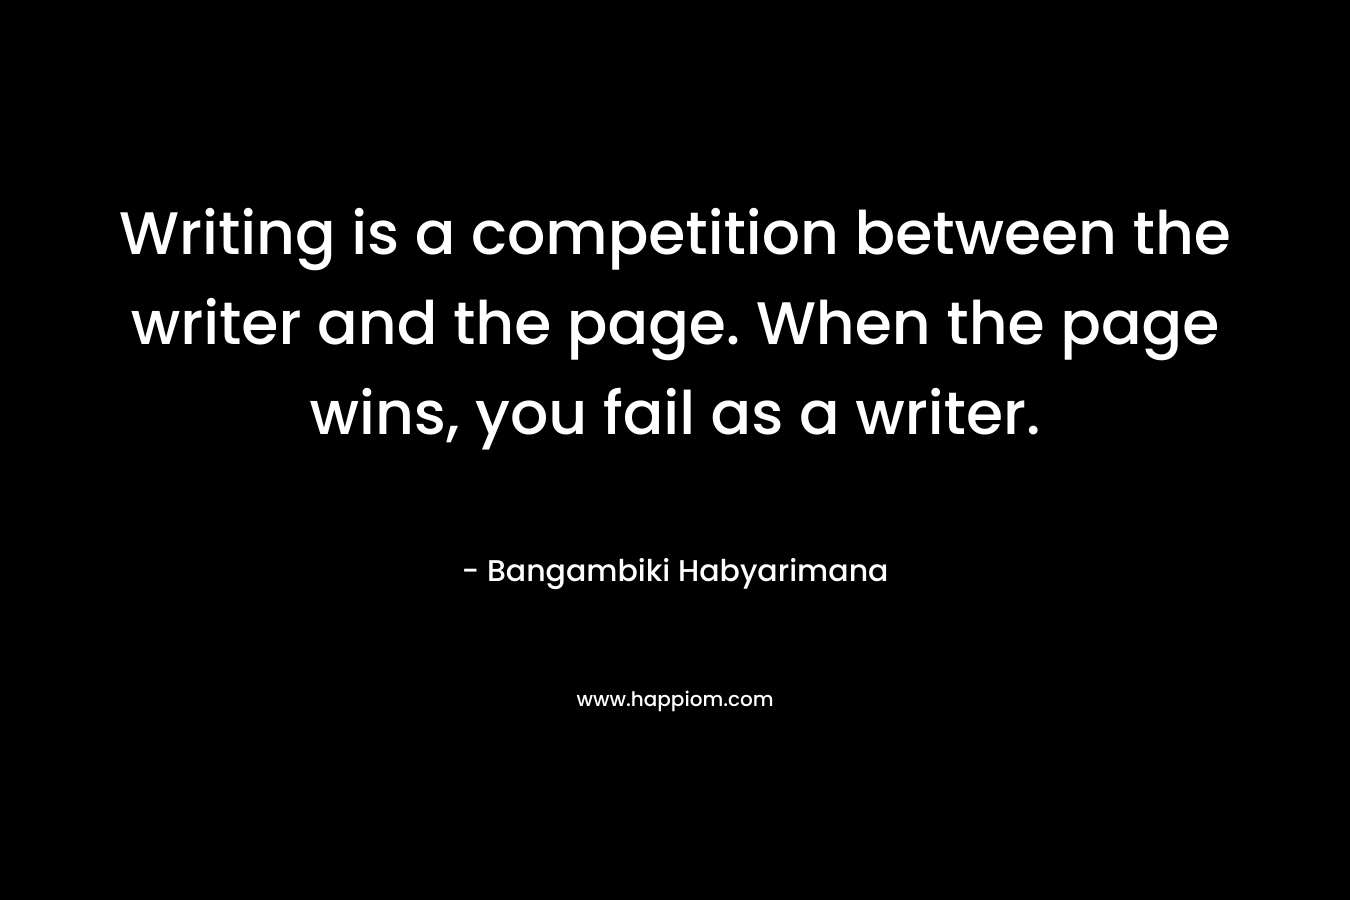 Writing is a competition between the writer and the page. When the page wins, you fail as a writer. – Bangambiki Habyarimana